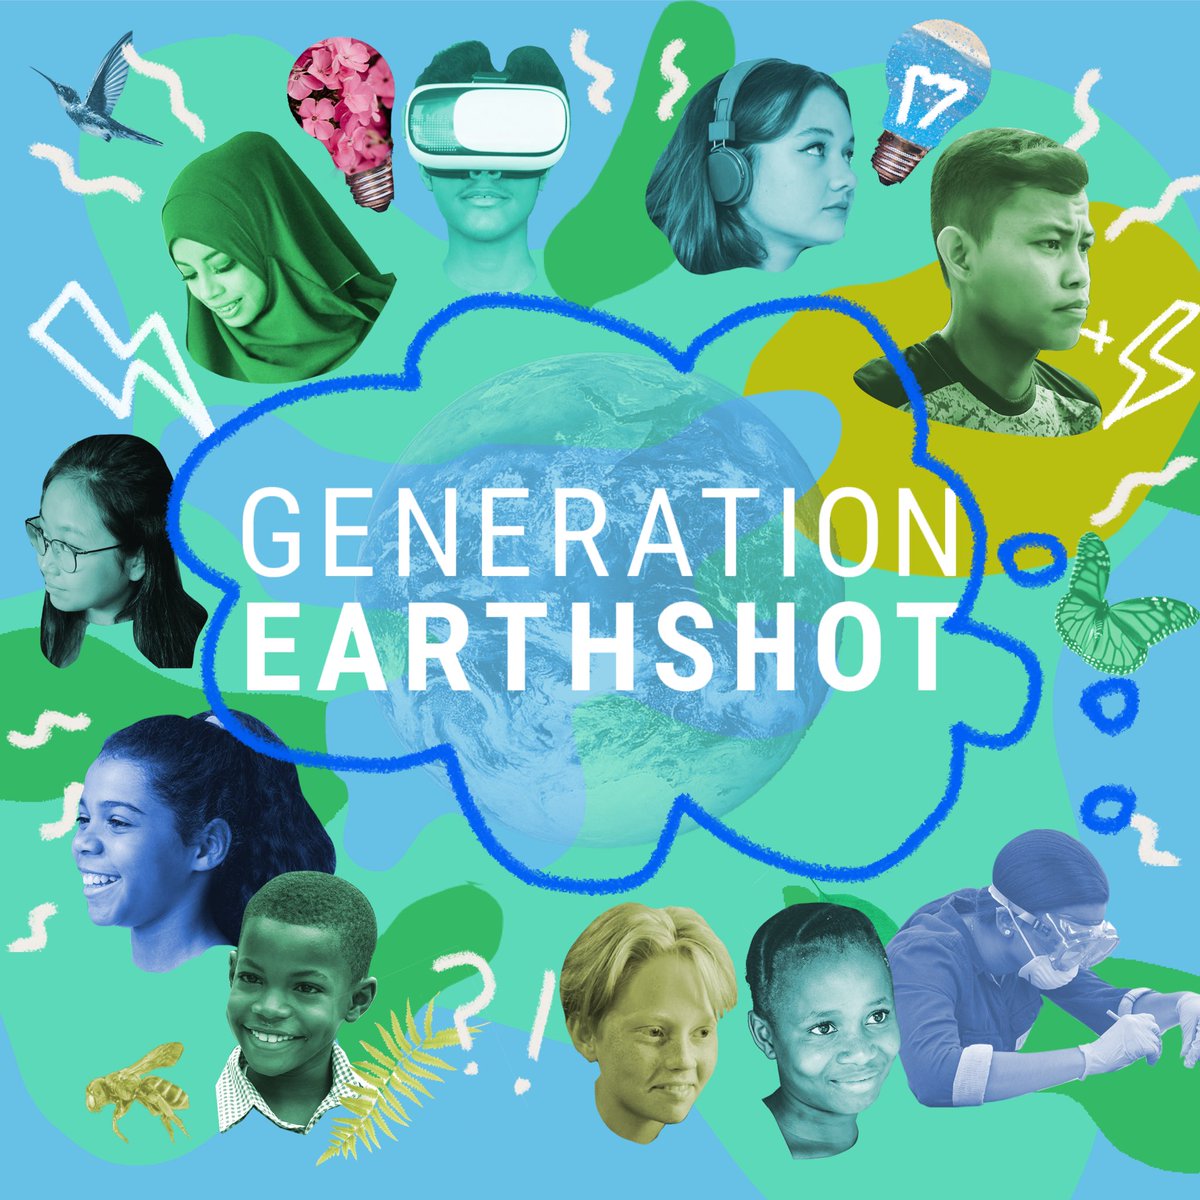 Young people inspire us every day through their ingenuity to bring about change and their ability to generate collective action.

That's why this #InternationalYouthDay, through #GenerationEarthshot, we celebrate young peoples’ drive and passion to help repair our planet.